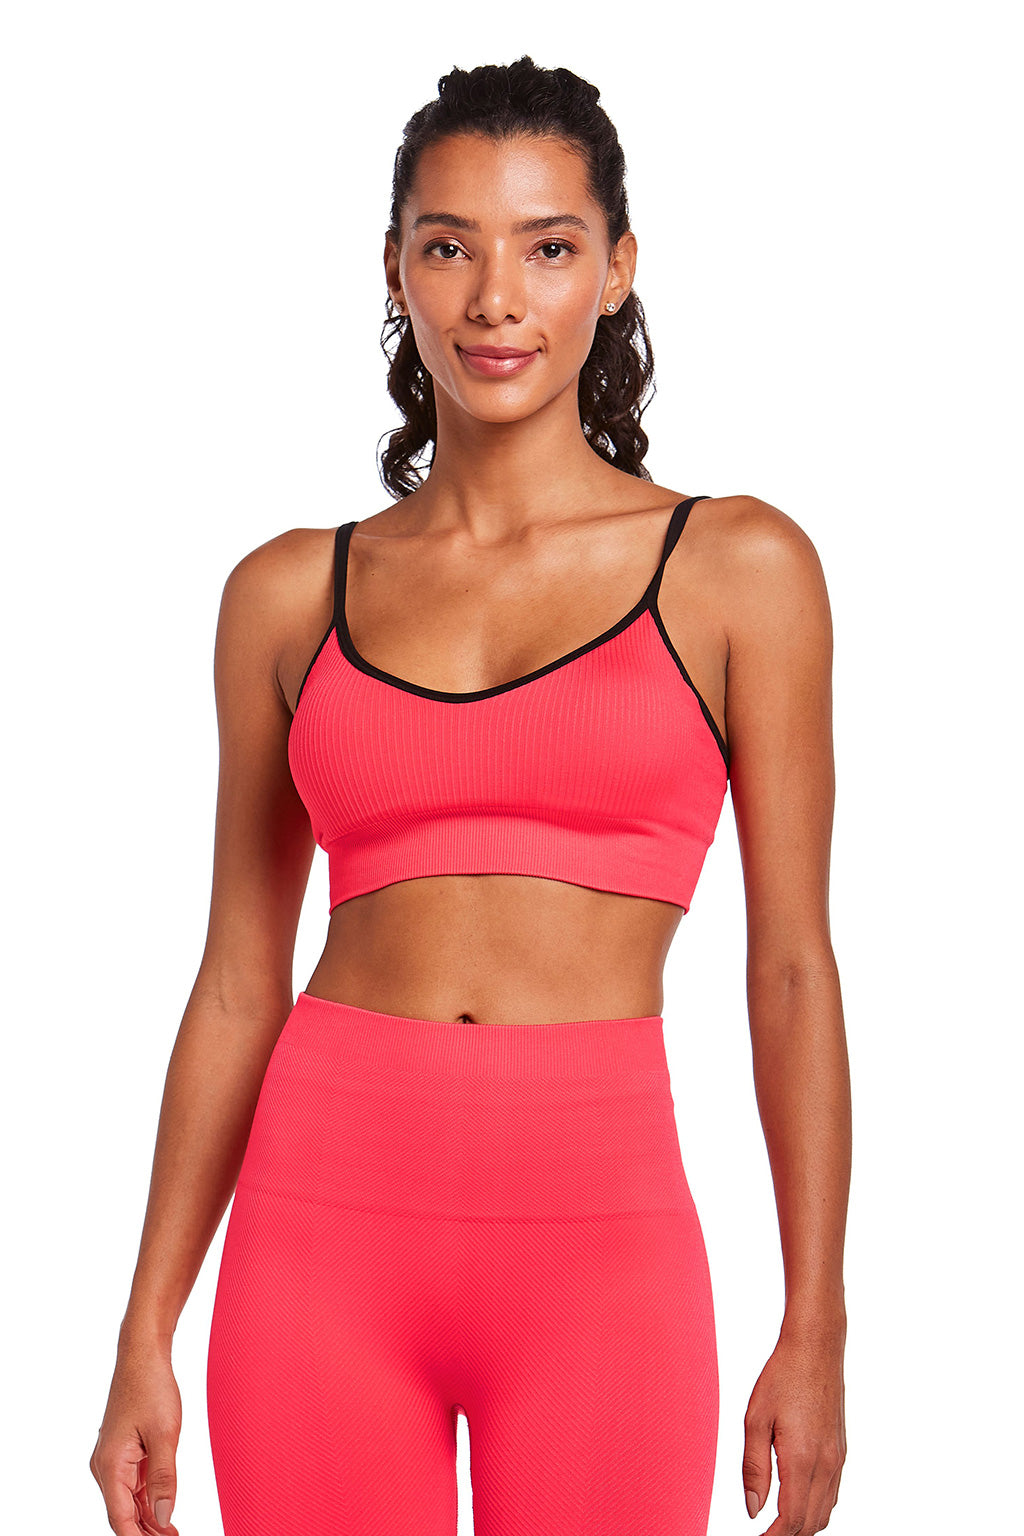 Brazilian Top Fitness Twill Sports Bra with Removable Pad - METRO